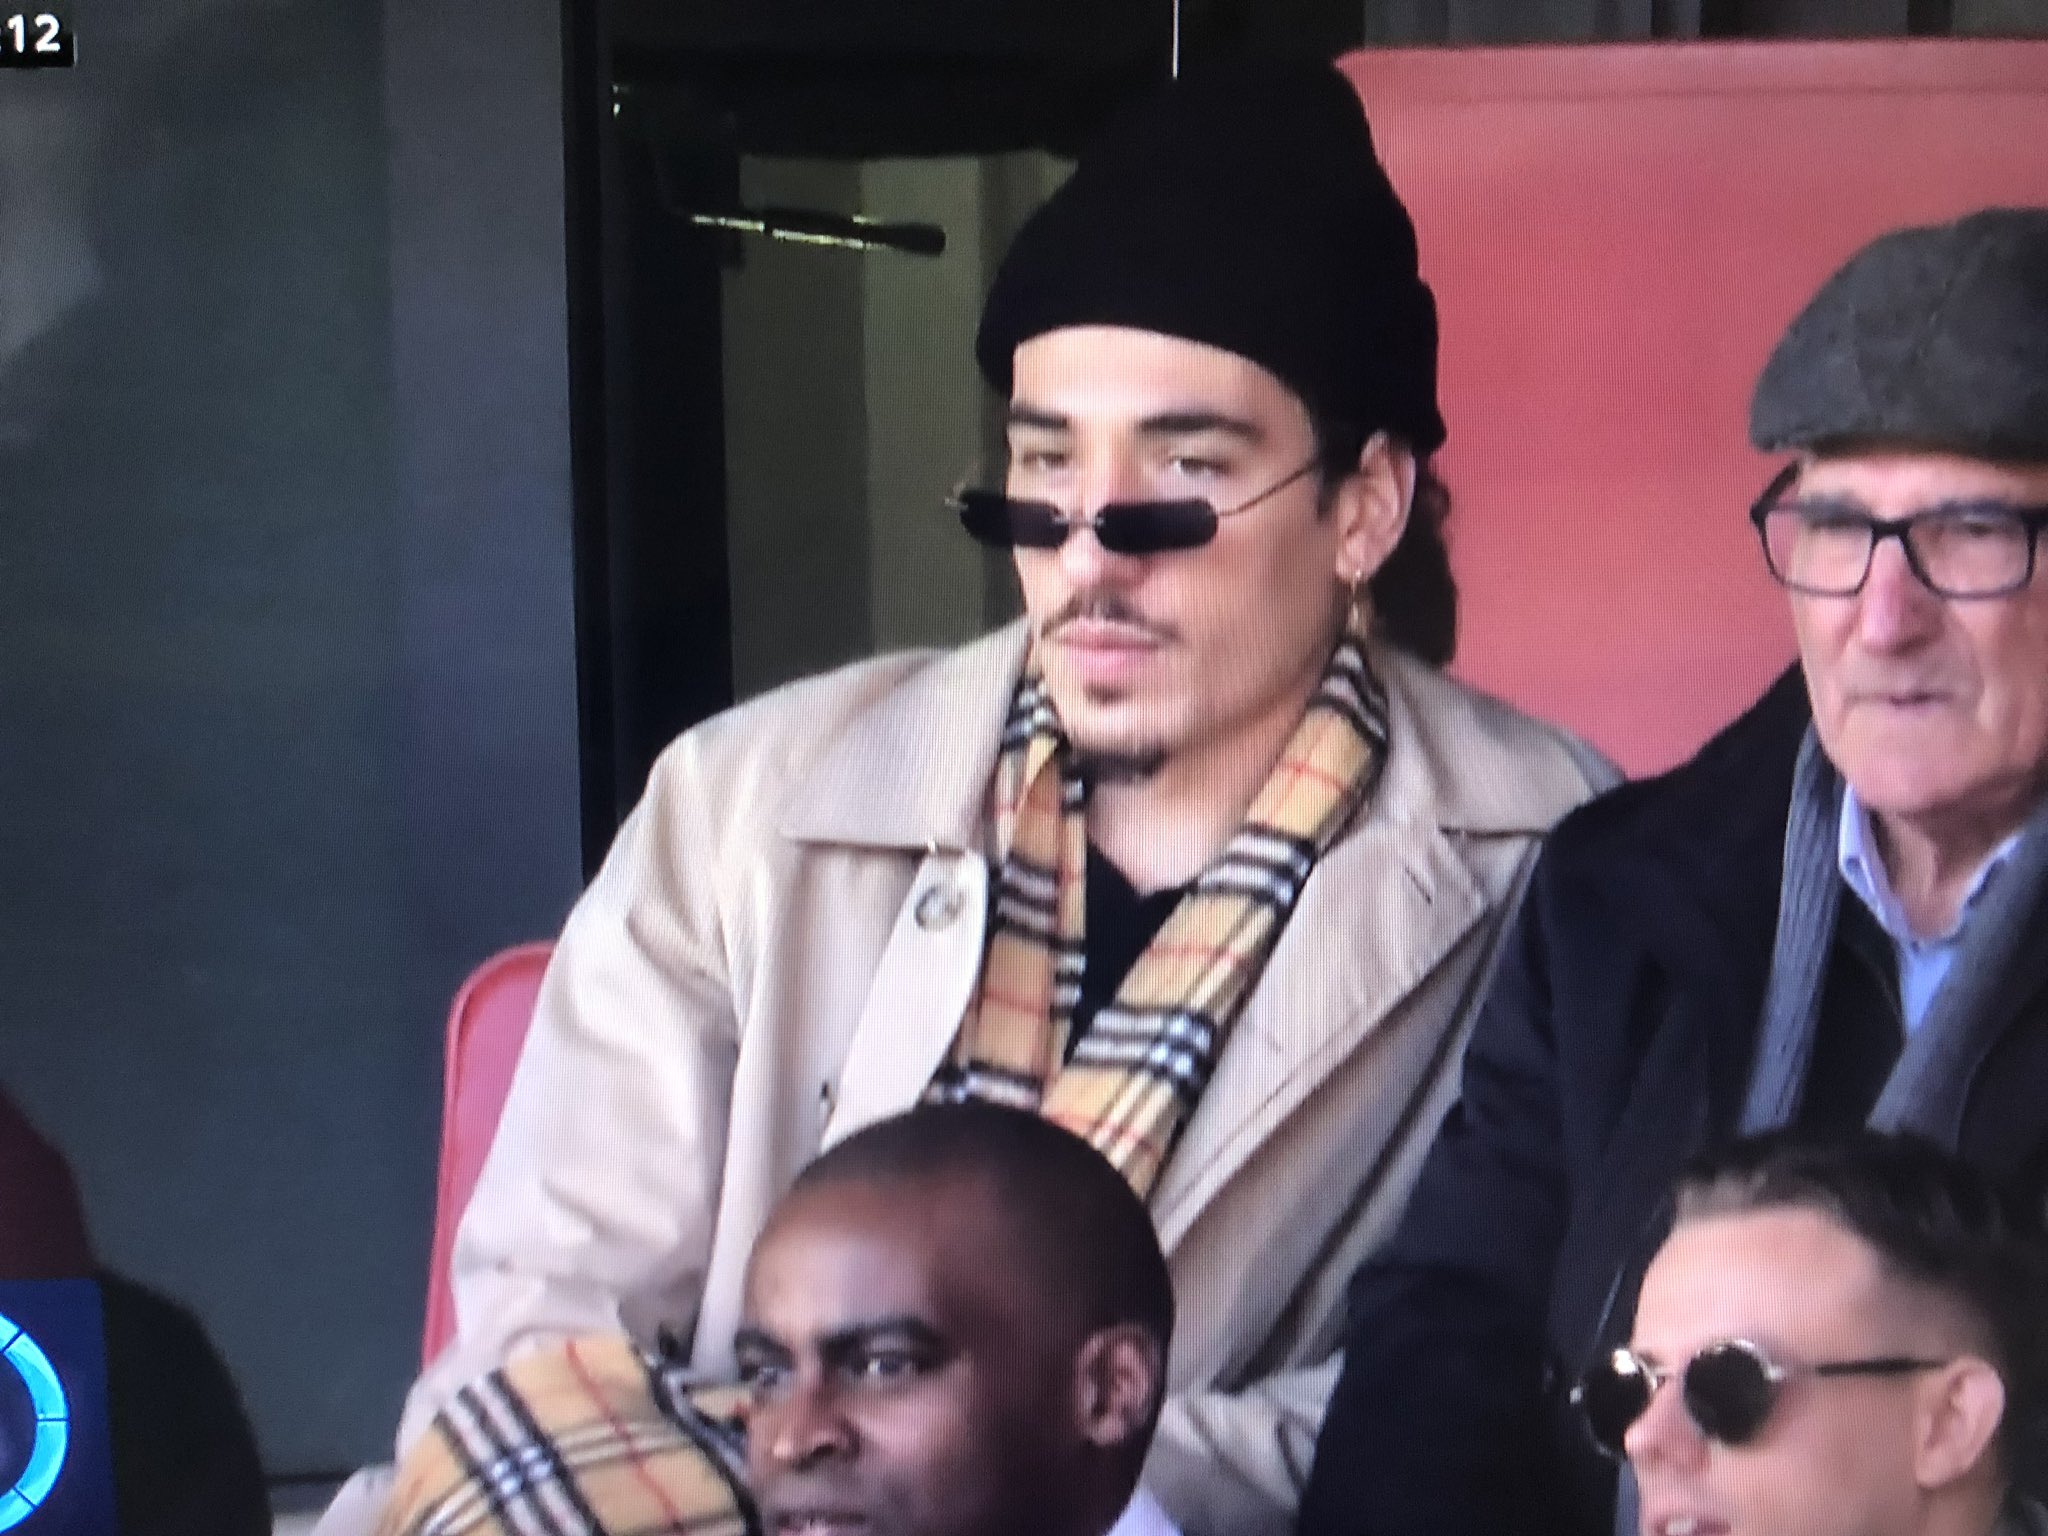 James Lorenzo on Twitter: "hector bellerin is either the man behind the gatwick drone or the detective who him https://t.co/McRmP9Ets3" / Twitter